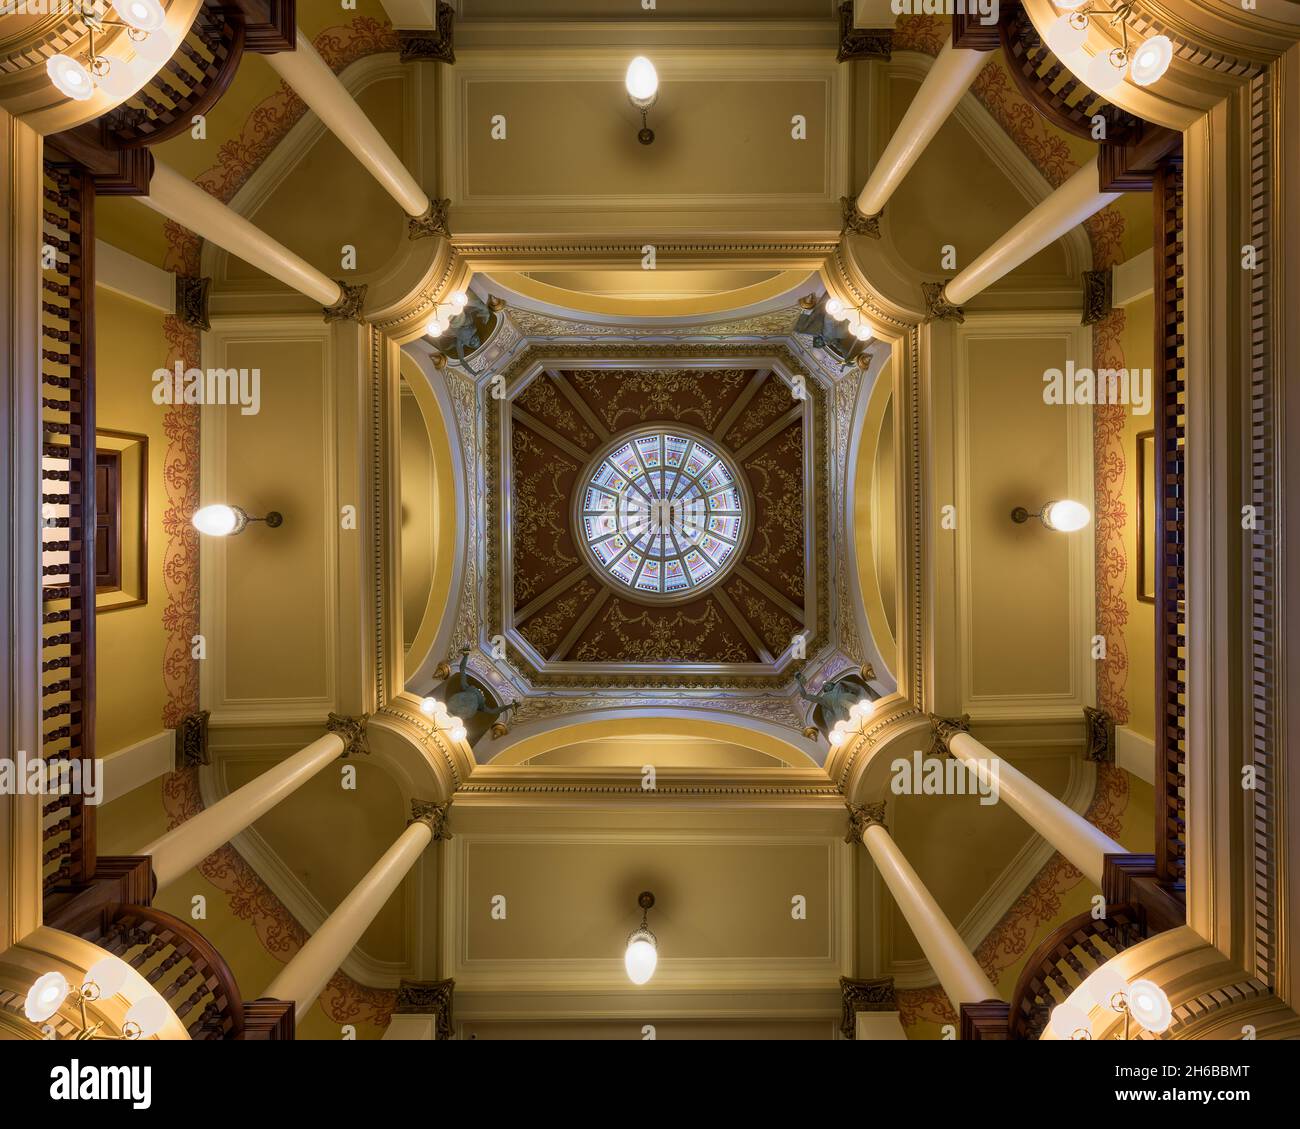 Inner dome from the floor of the rotunda of the Wyoming State Capitol building in Cheyenne, Wyoming Stock Photo